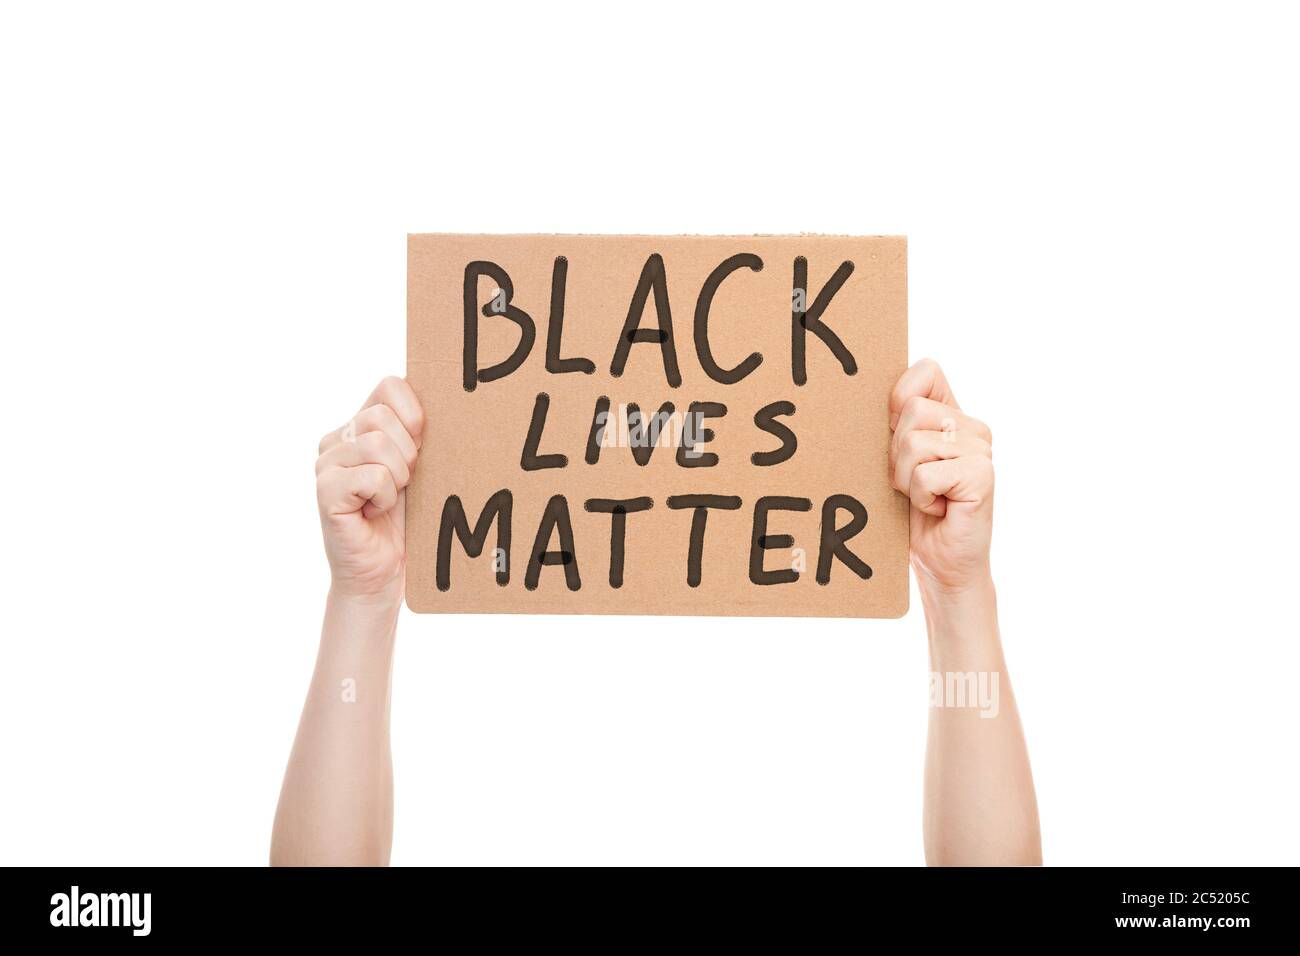 protest hands holding a cardboard poster with the message text Black lives matter isolated on white background, concept on the theme of prostate for p Stock Photo